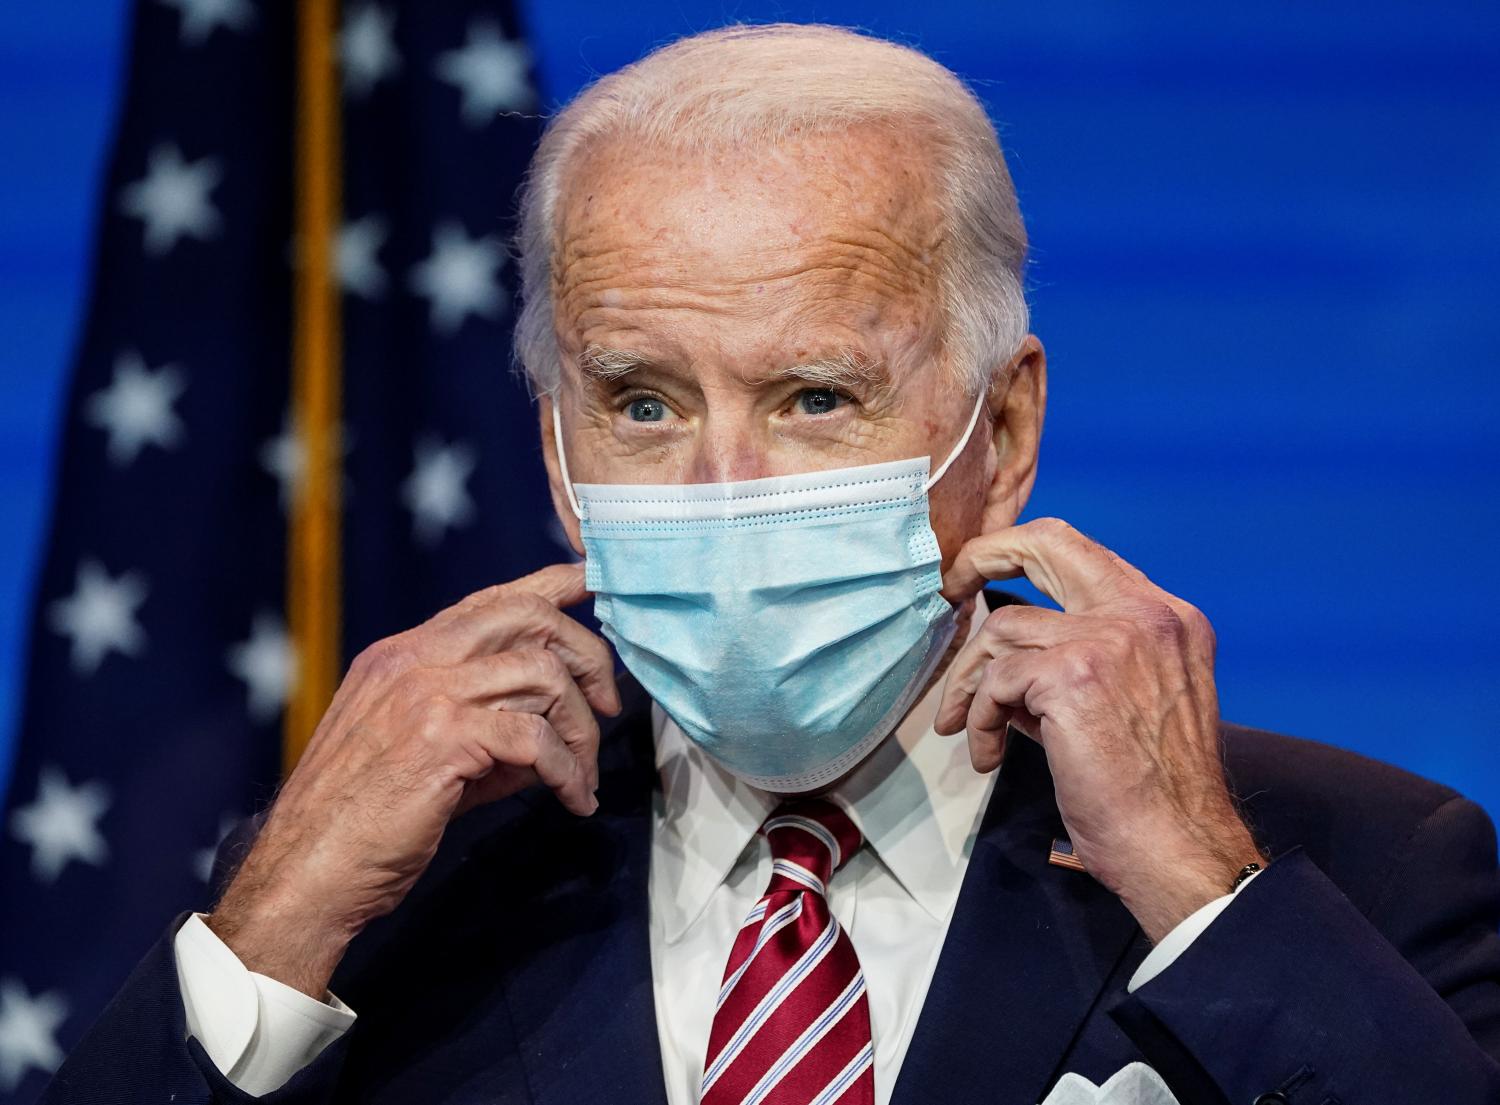 U.S. President-elect Joe Biden adjusts his face mask after speaking about the U.S. economy following a briefing with economic advisers in Wilmington, Delaware, U.S., November 16, 2020. REUTERS/Kevin Lamarque